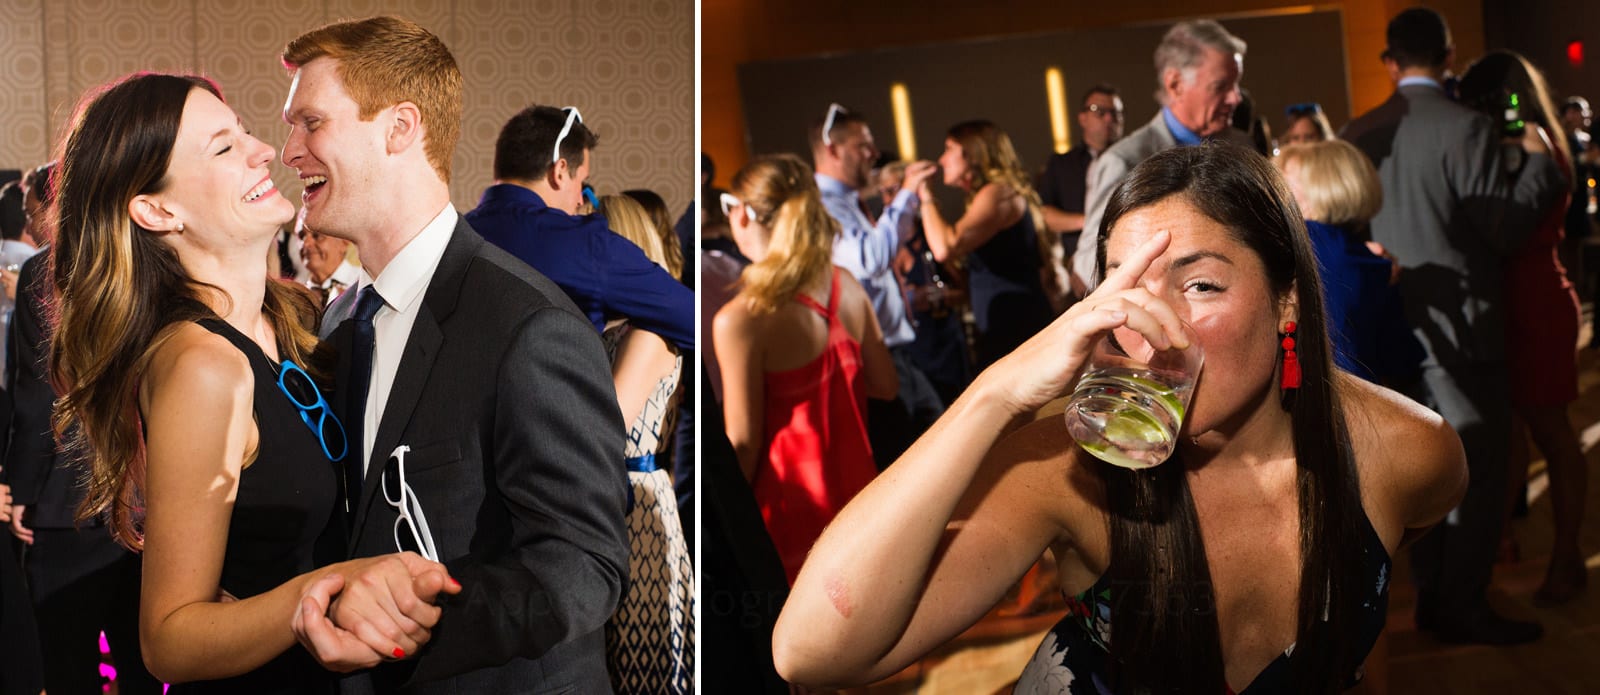 A tall couple laughs as they dance at a wedding reception and a long-haired young woman sips a cocktail while looking at the camera with one eye during Wedding Photography at Fairmont Hotel Pittsburgh.